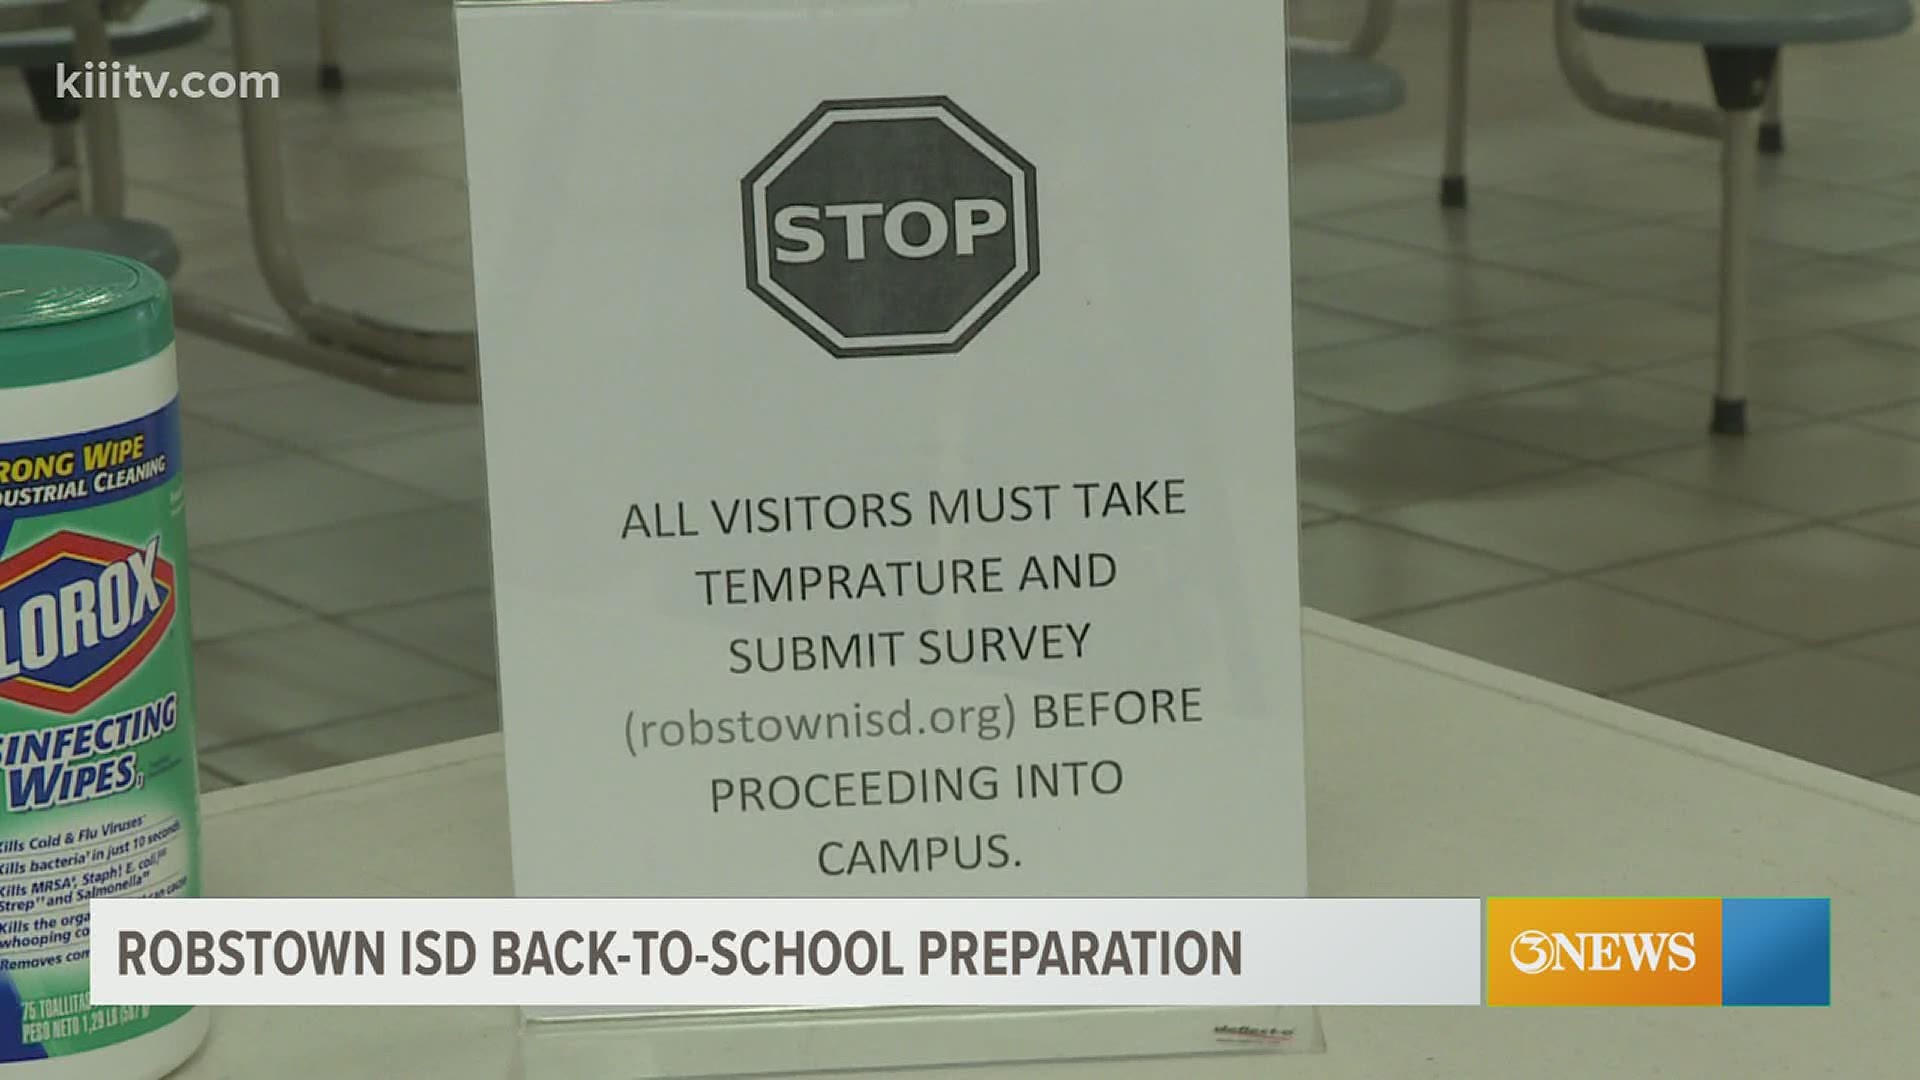 While classes are starting remotely, Robstown ISD is preparing for when students return to campus.